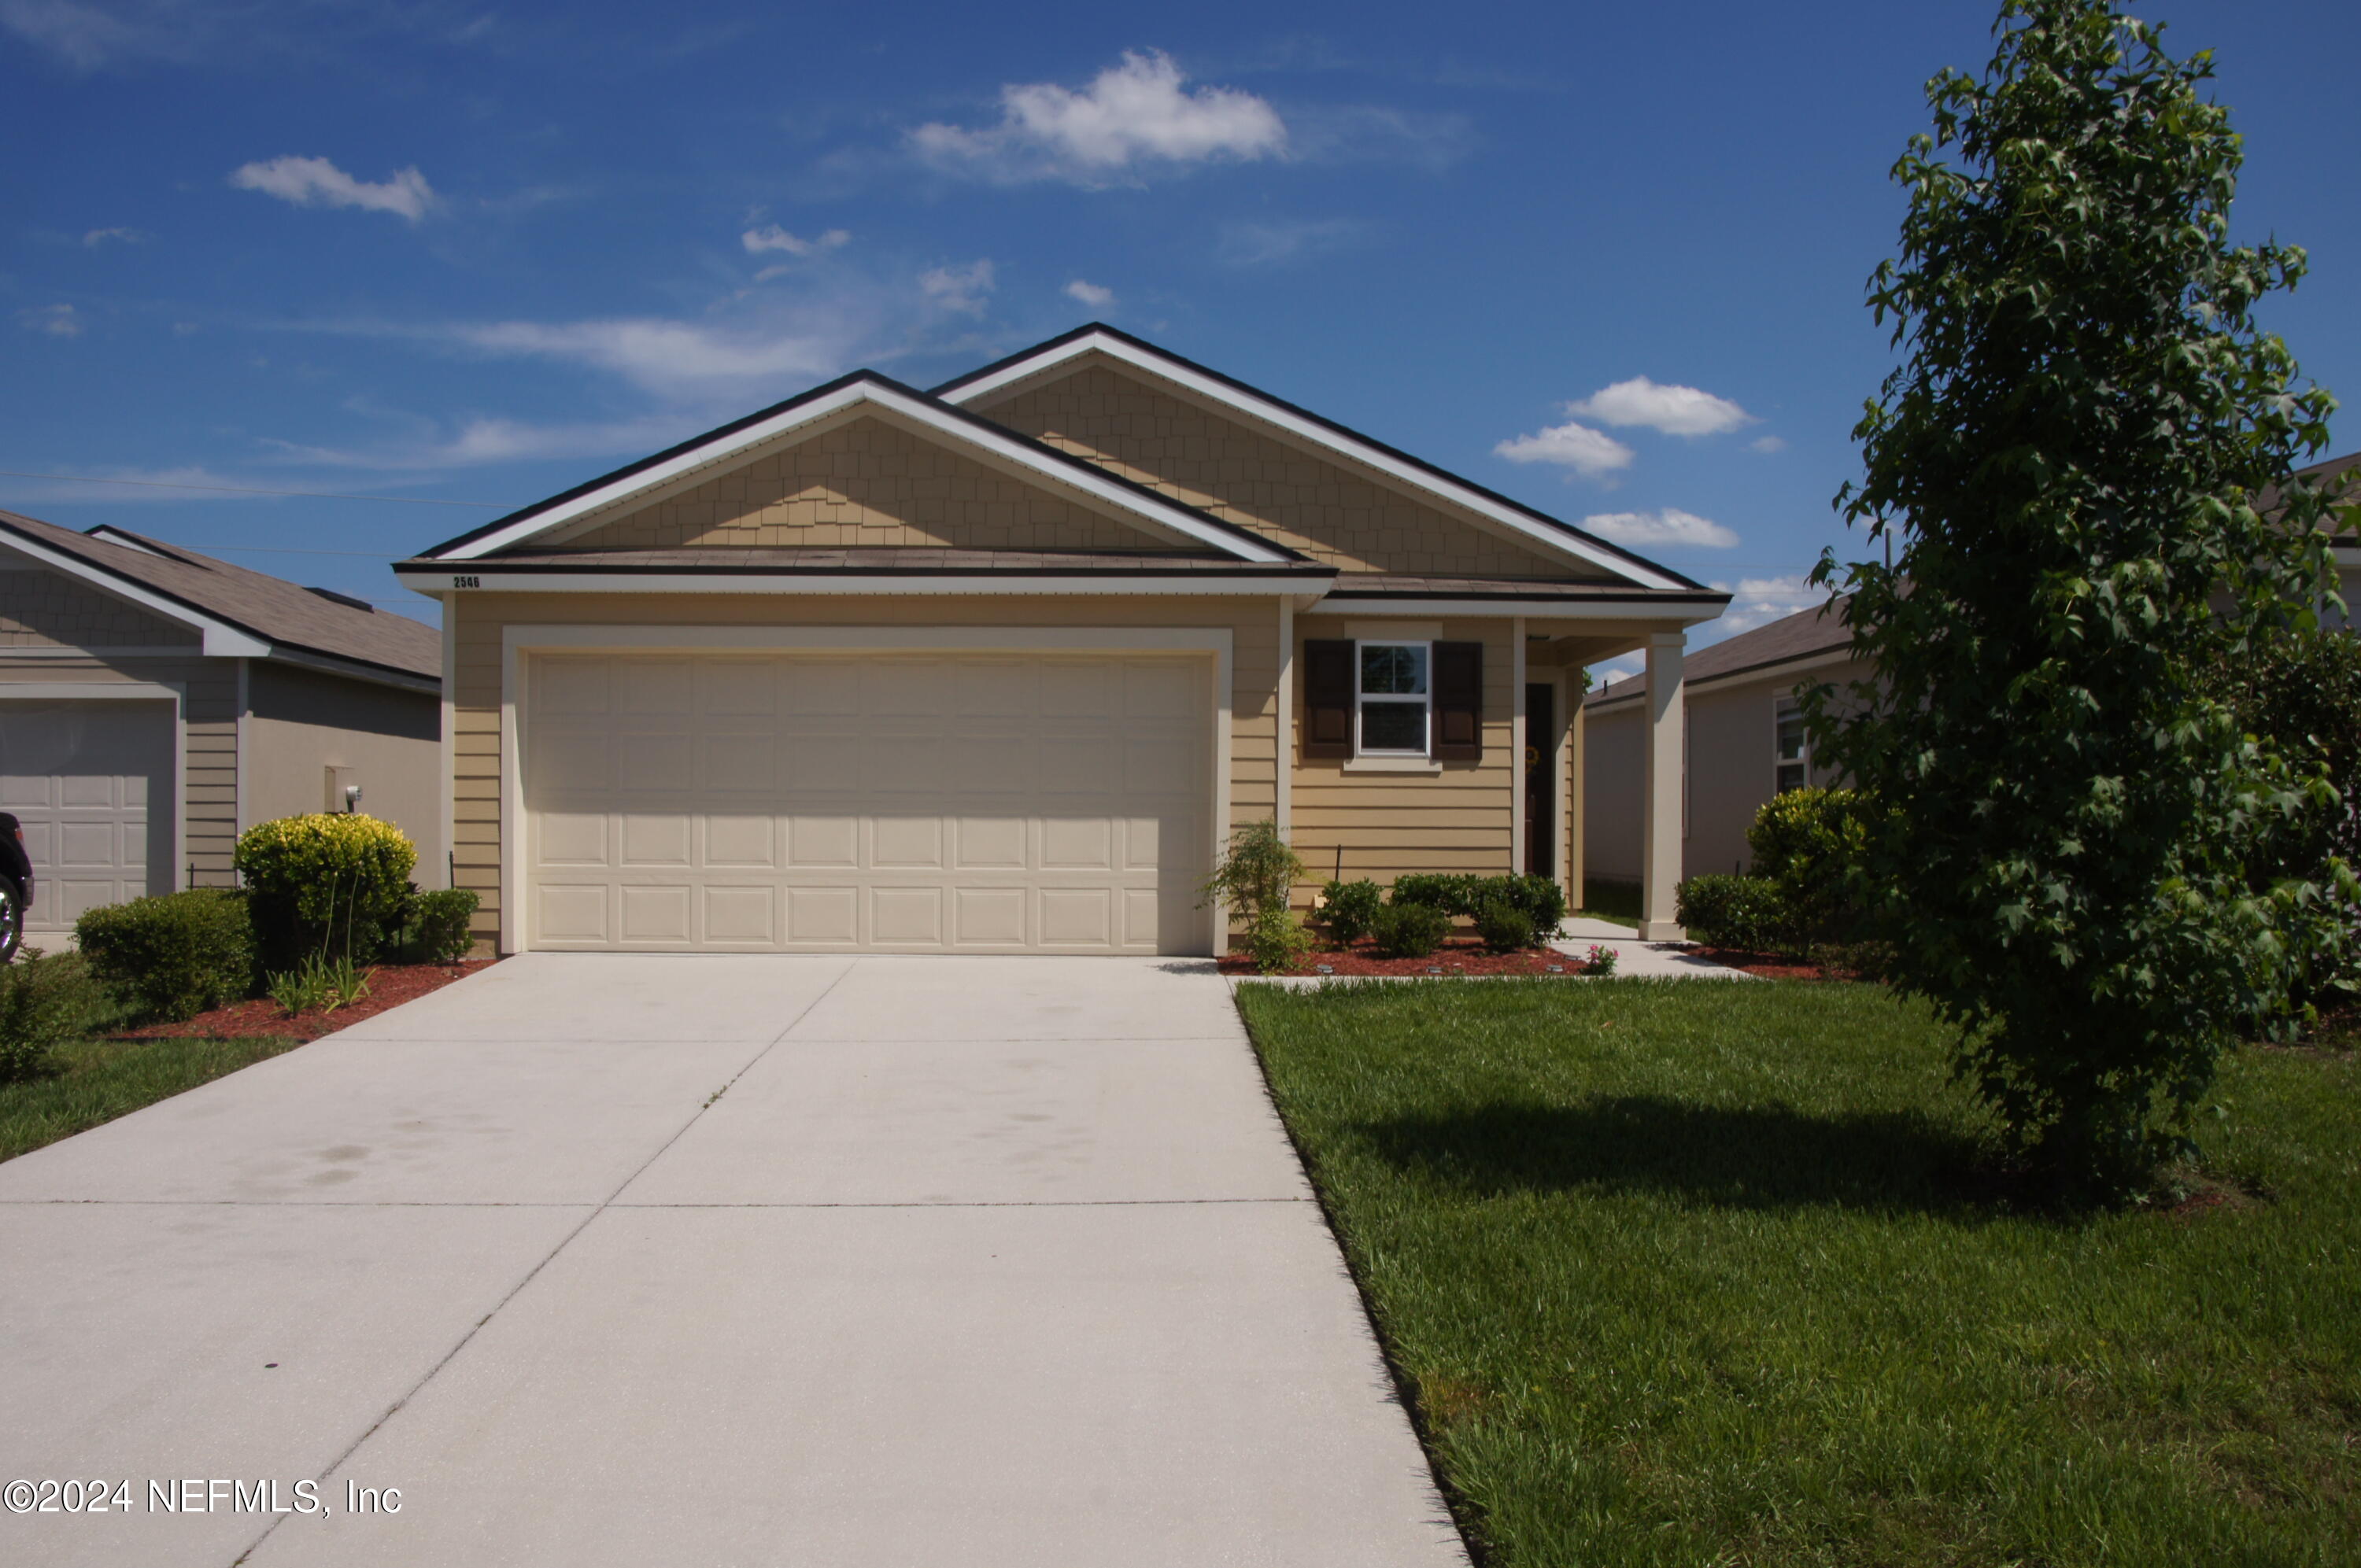 Green Cove Springs, FL home for sale located at 2546 Tall Grass Road, Green Cove Springs, FL 32043